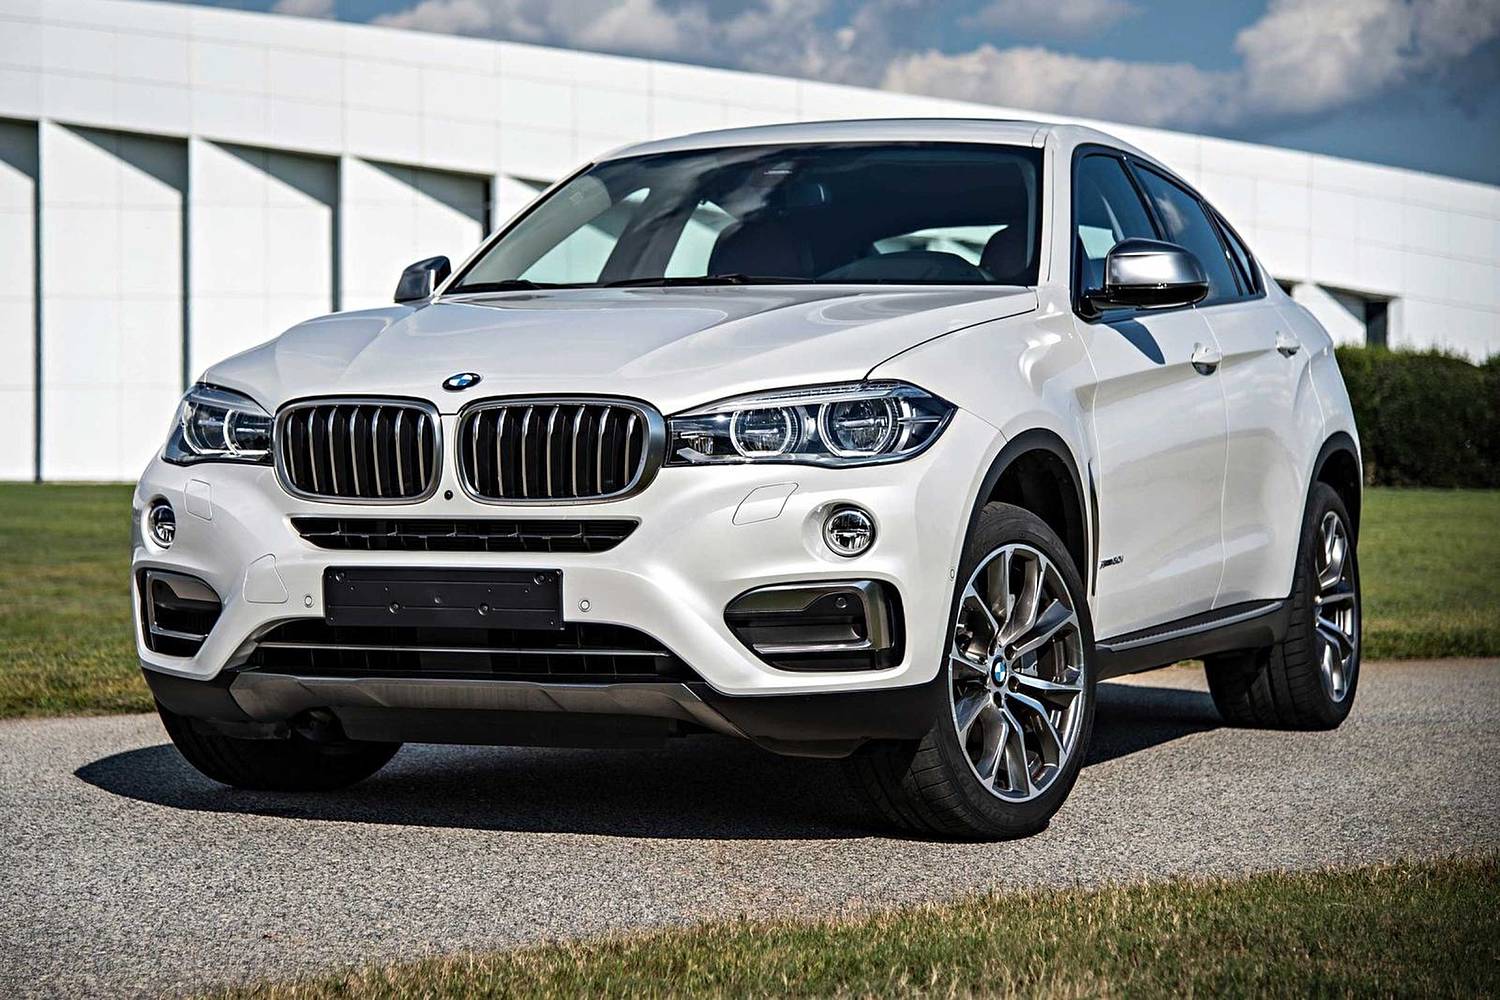 BMW X6 xDrive50i 4dr SUV Exterior Shown (2017 model year shown)